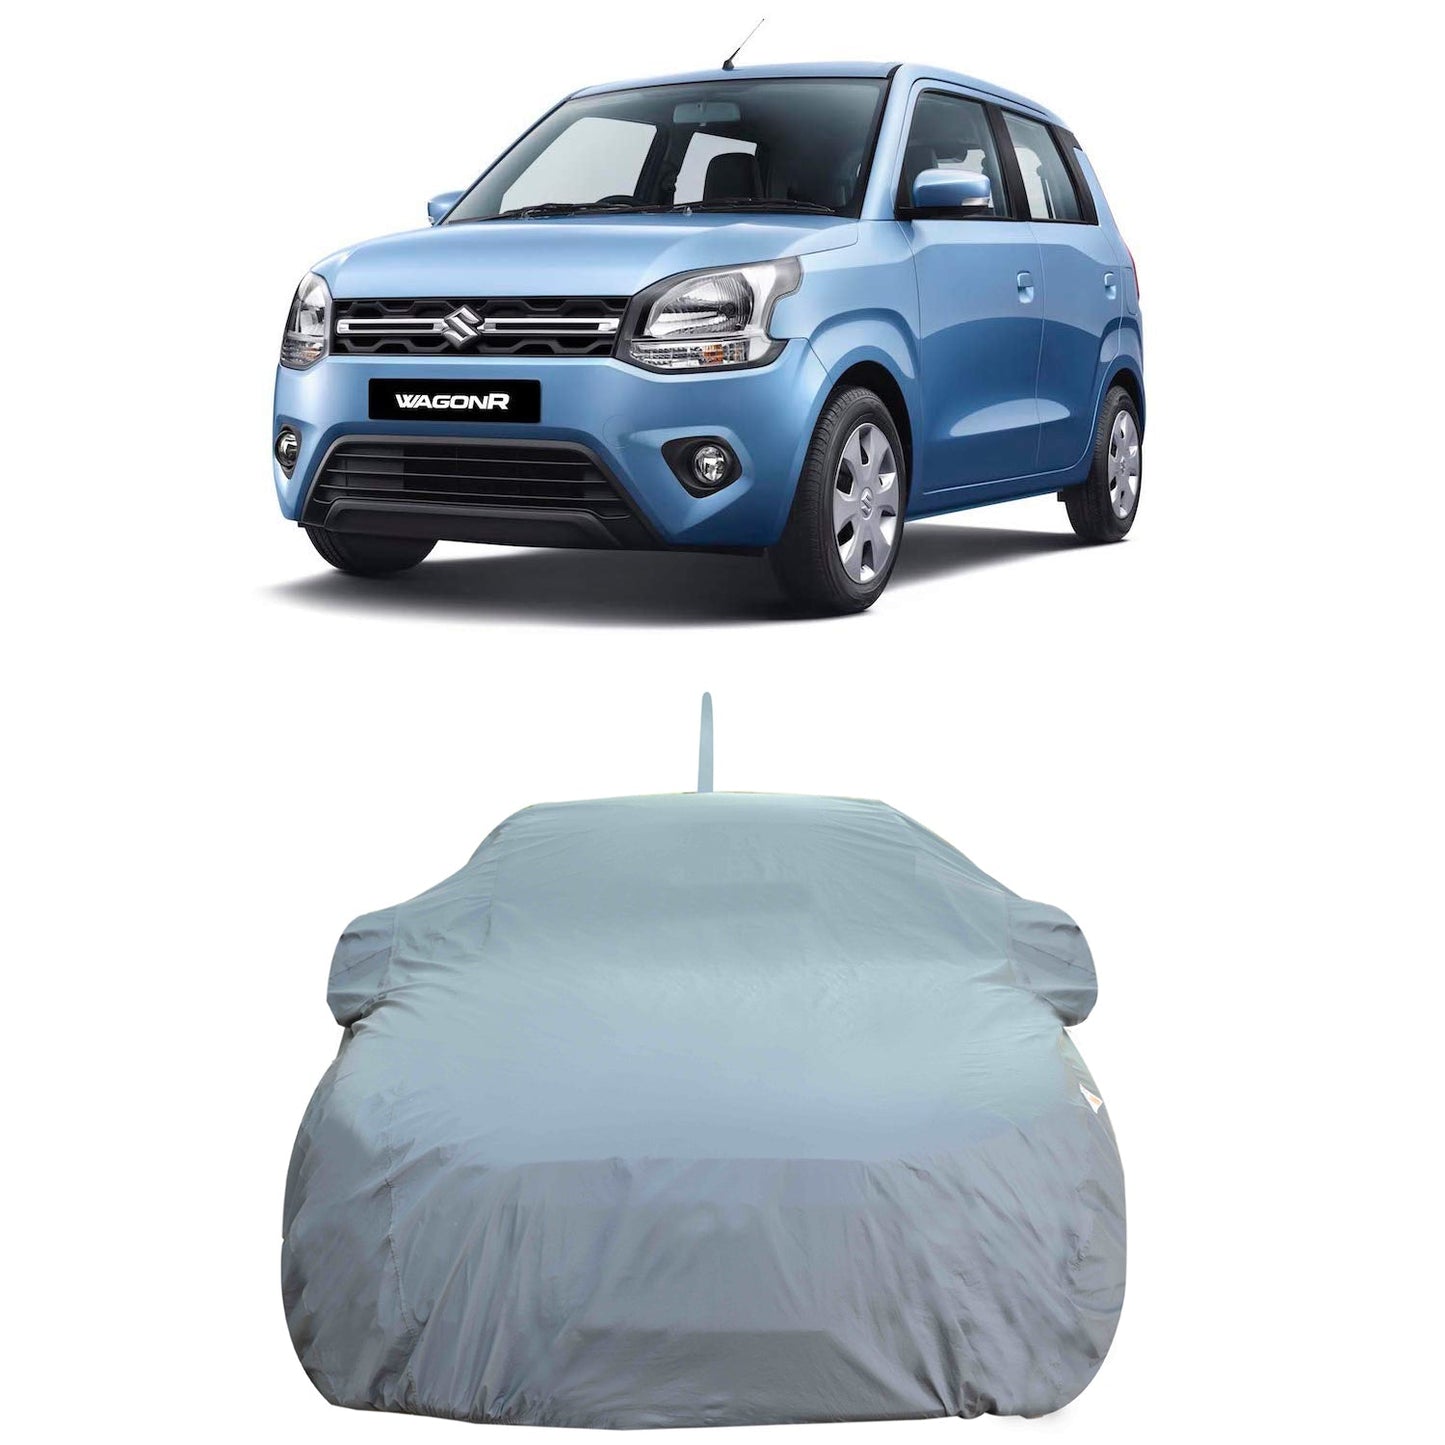 Oshotto Dark Grey 100% Anti Reflective, dustproof and Water Proof Car Body Cover with Mirror Pocket For Maruti Suzuki WagonR 2019-2023 (with Antenna Pocket)